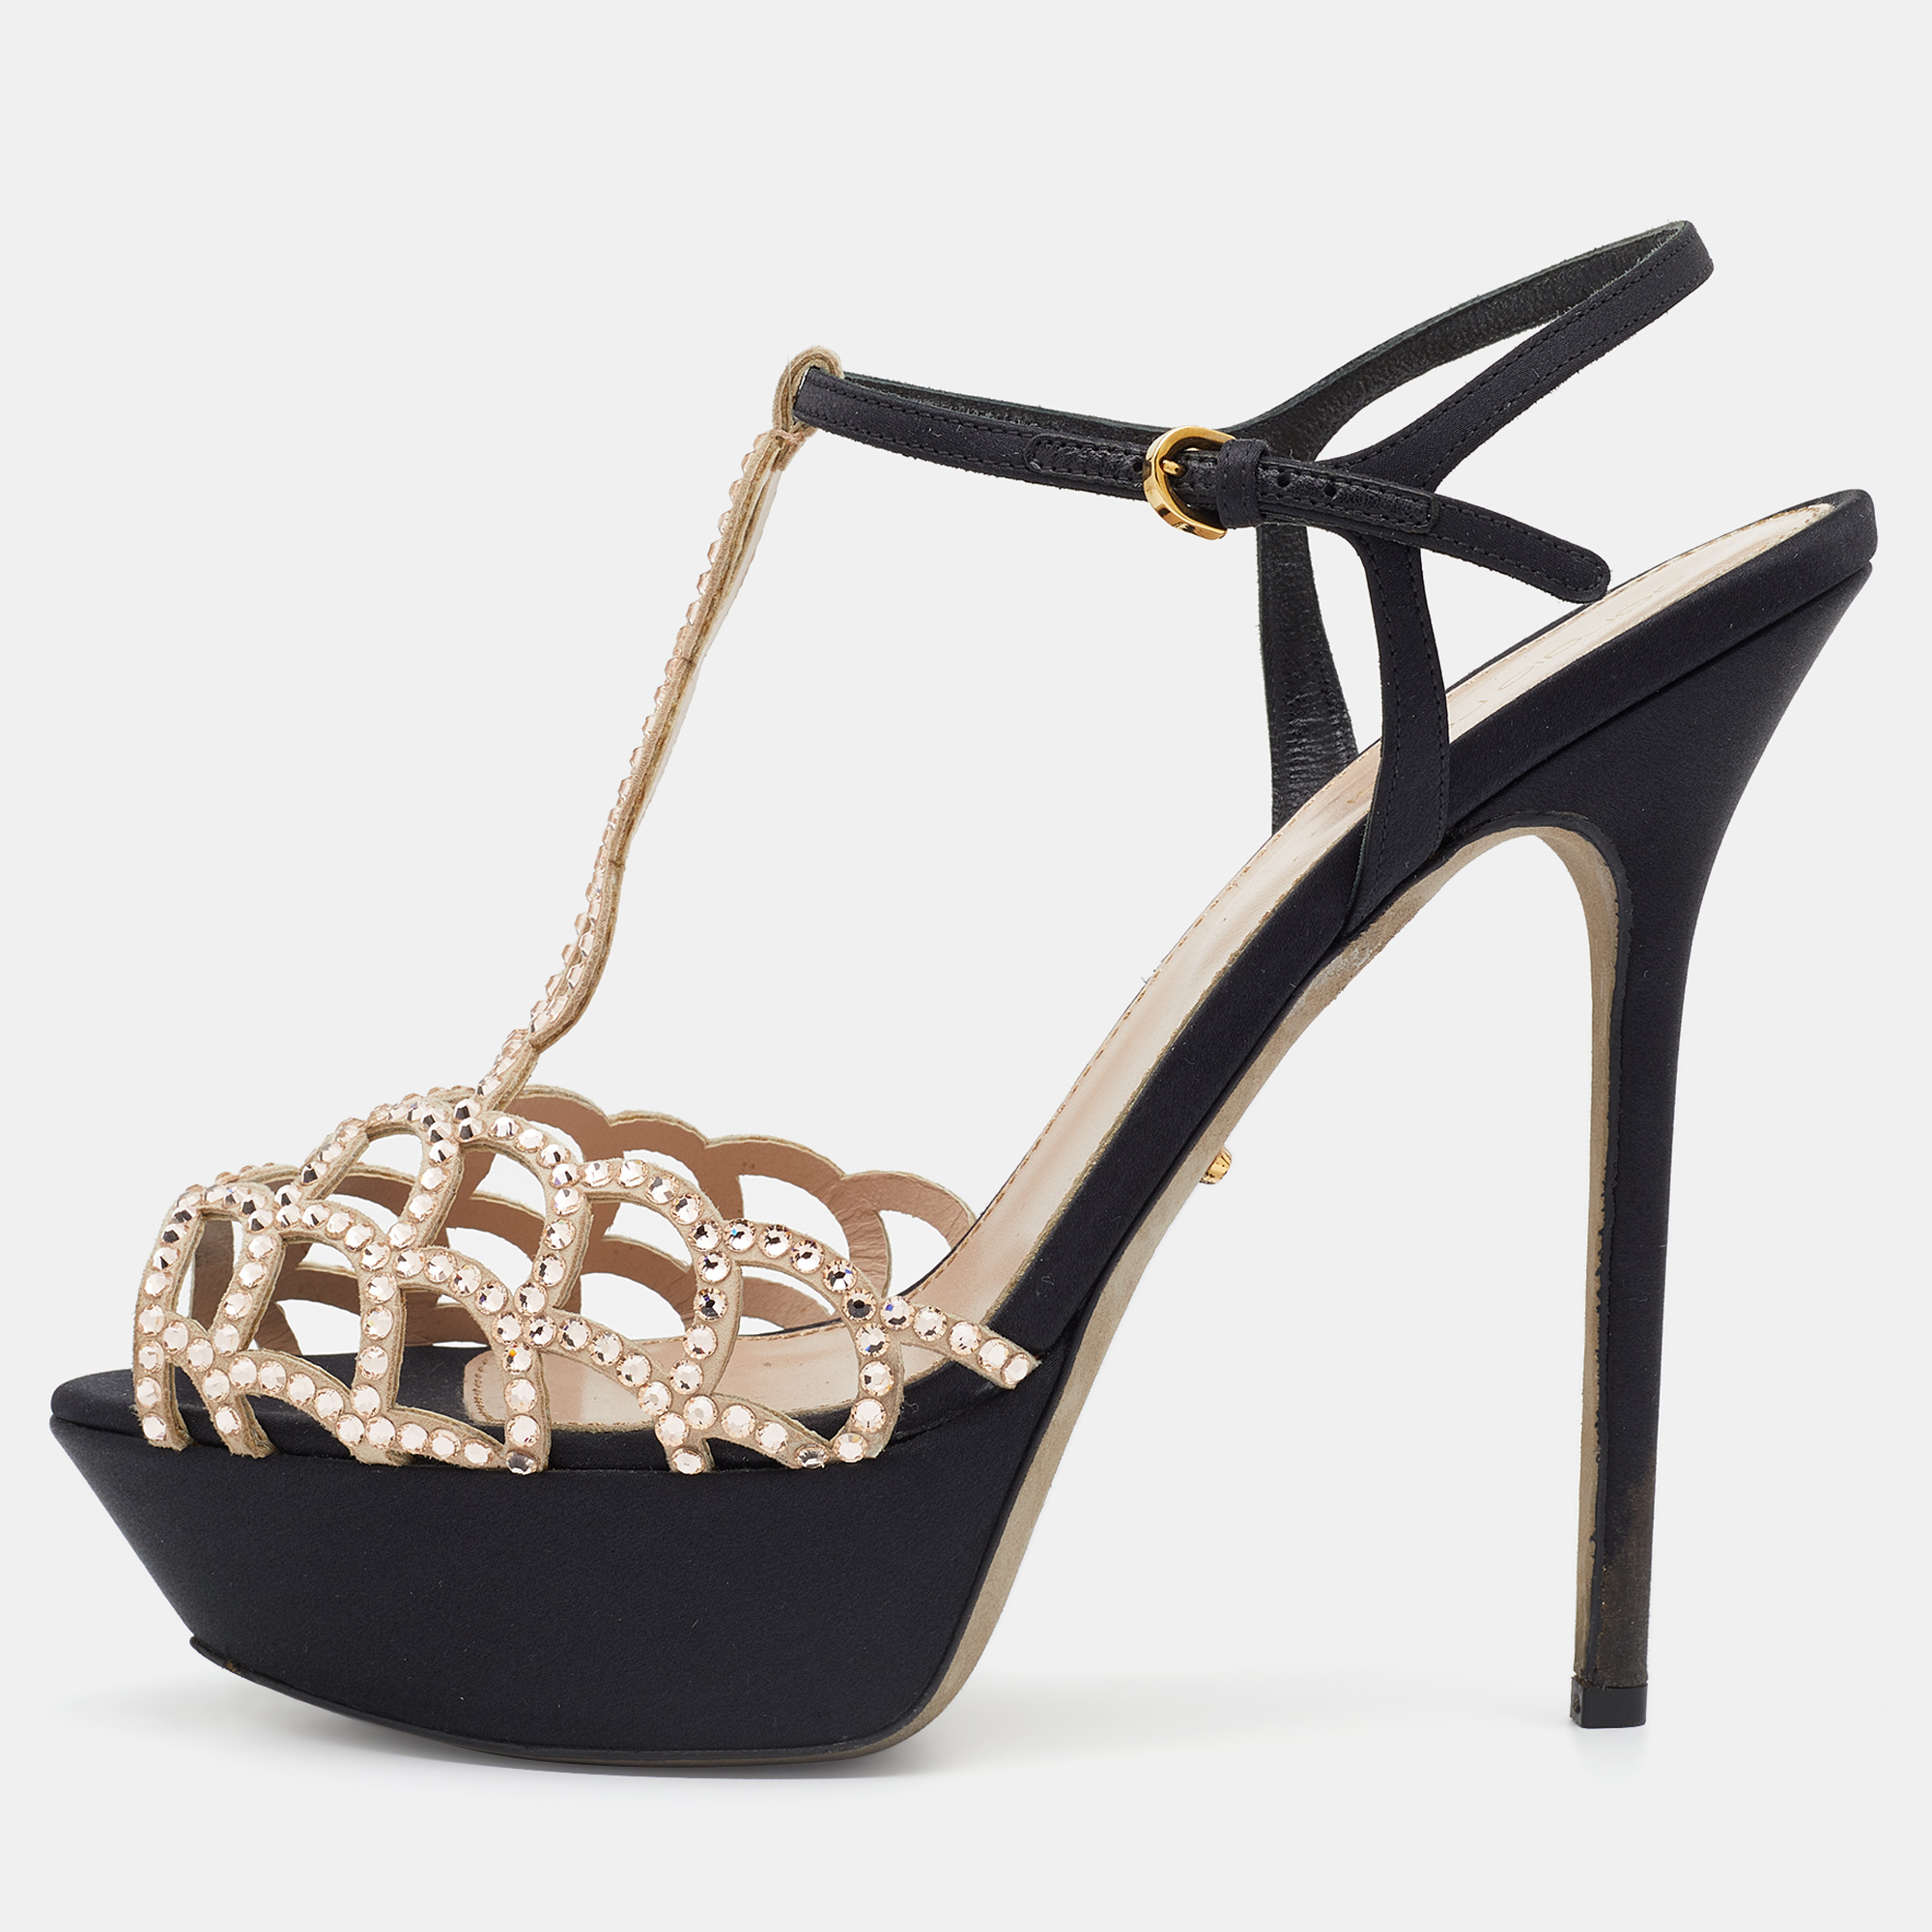 Pre-owned Sergio Rossi Black/beige Satin And Suede Crystal Embellished Strappy Scalloped Platform Sandals Size 40